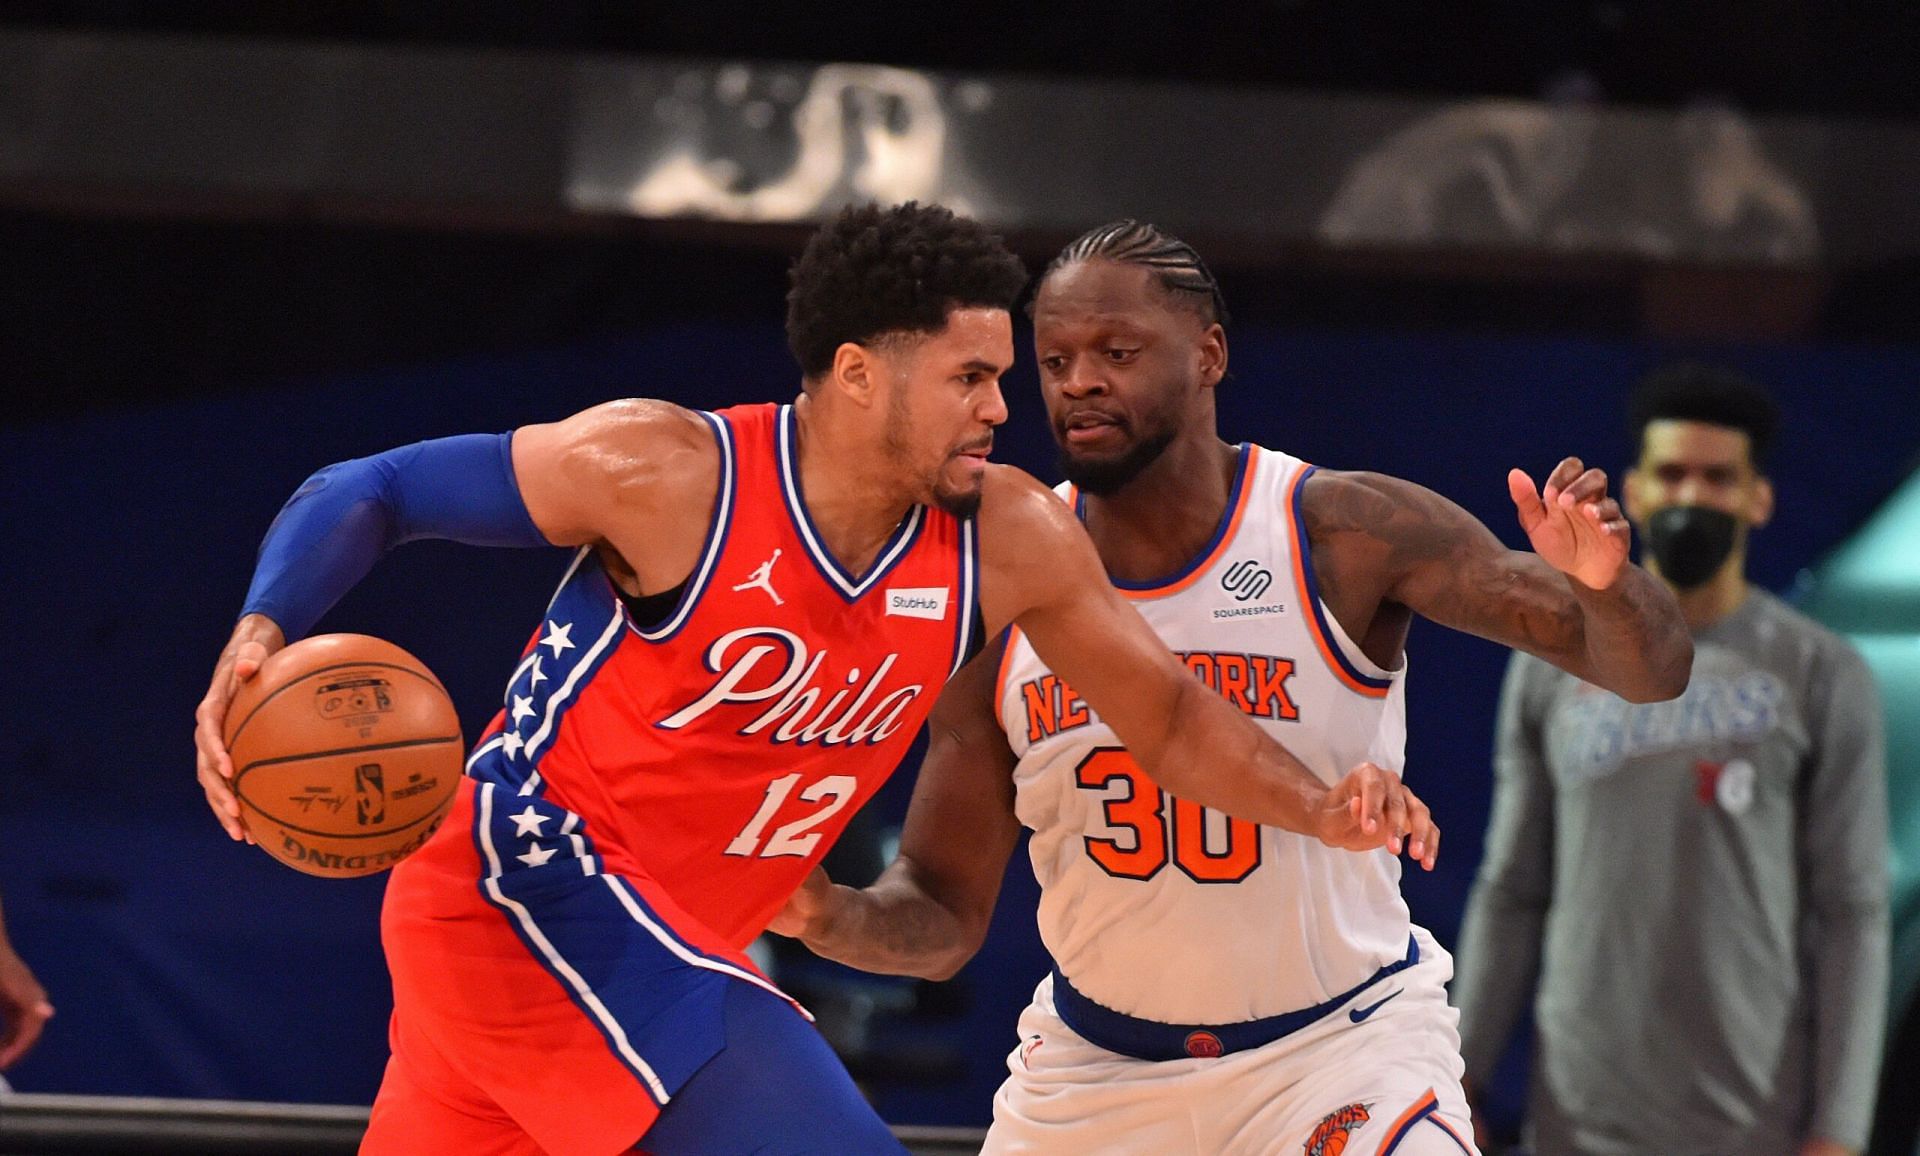 The Philadelphia 76ers square off against the New York Knicks on Tuesday at Madison Square Garden [Photo: NBA.com]